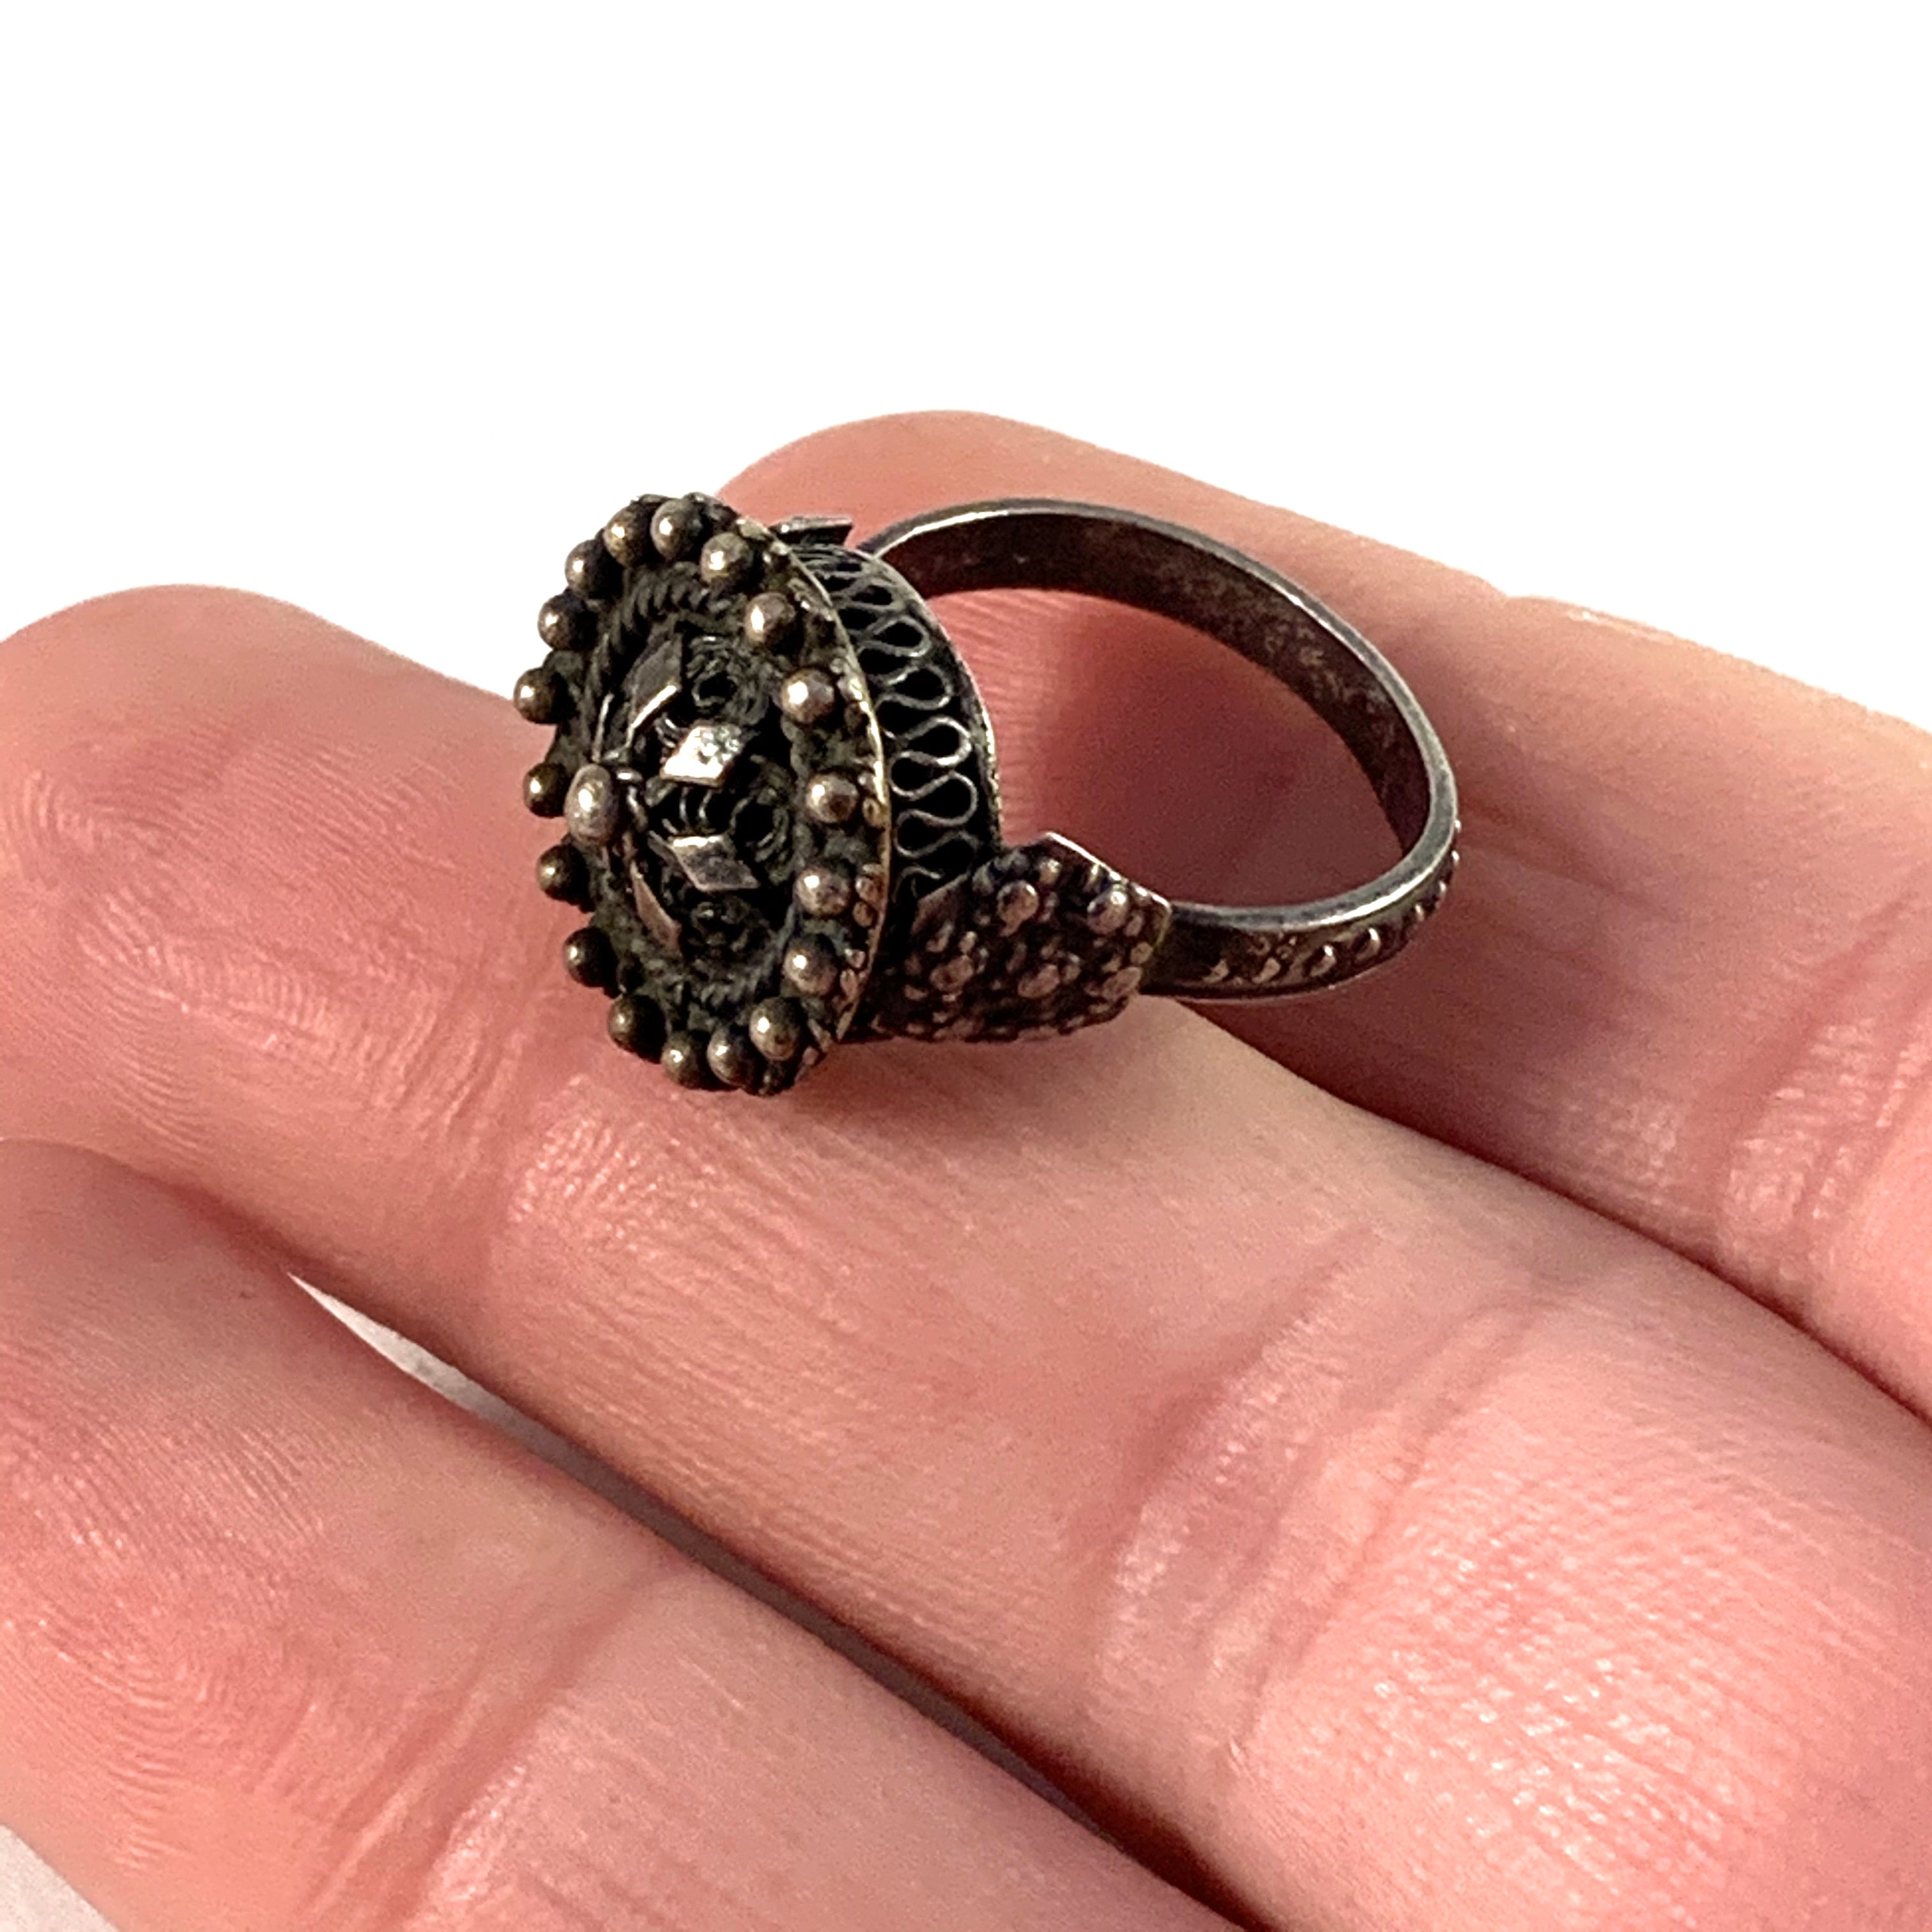 Antique Victorian (or earlier) Solid Silver Ring.